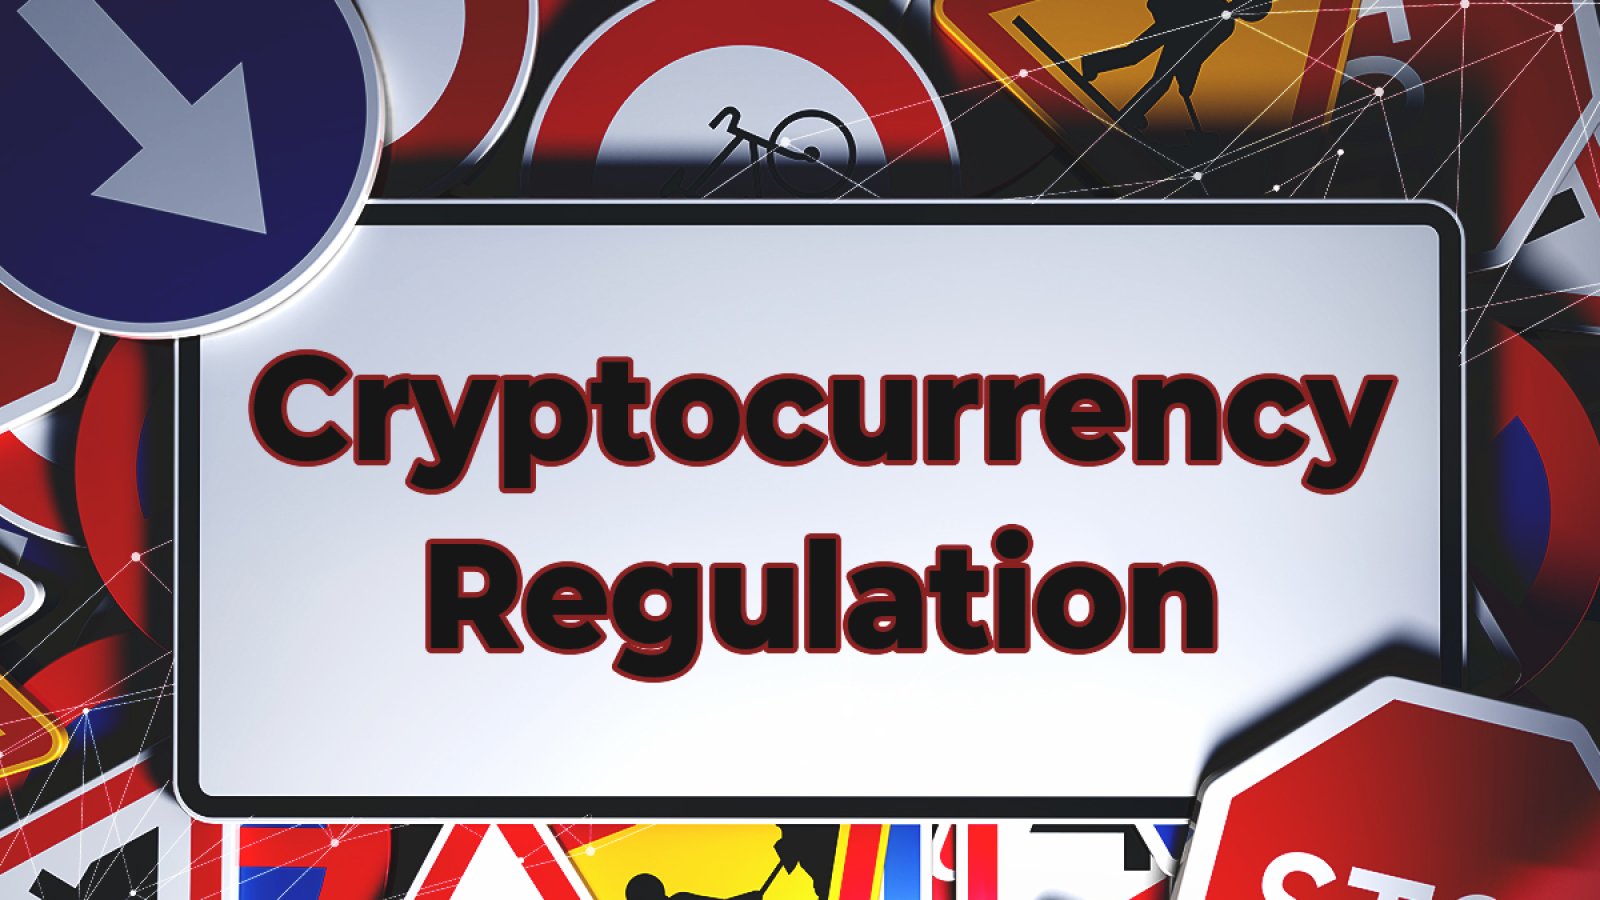 What is Cryptocurrency Regulation?